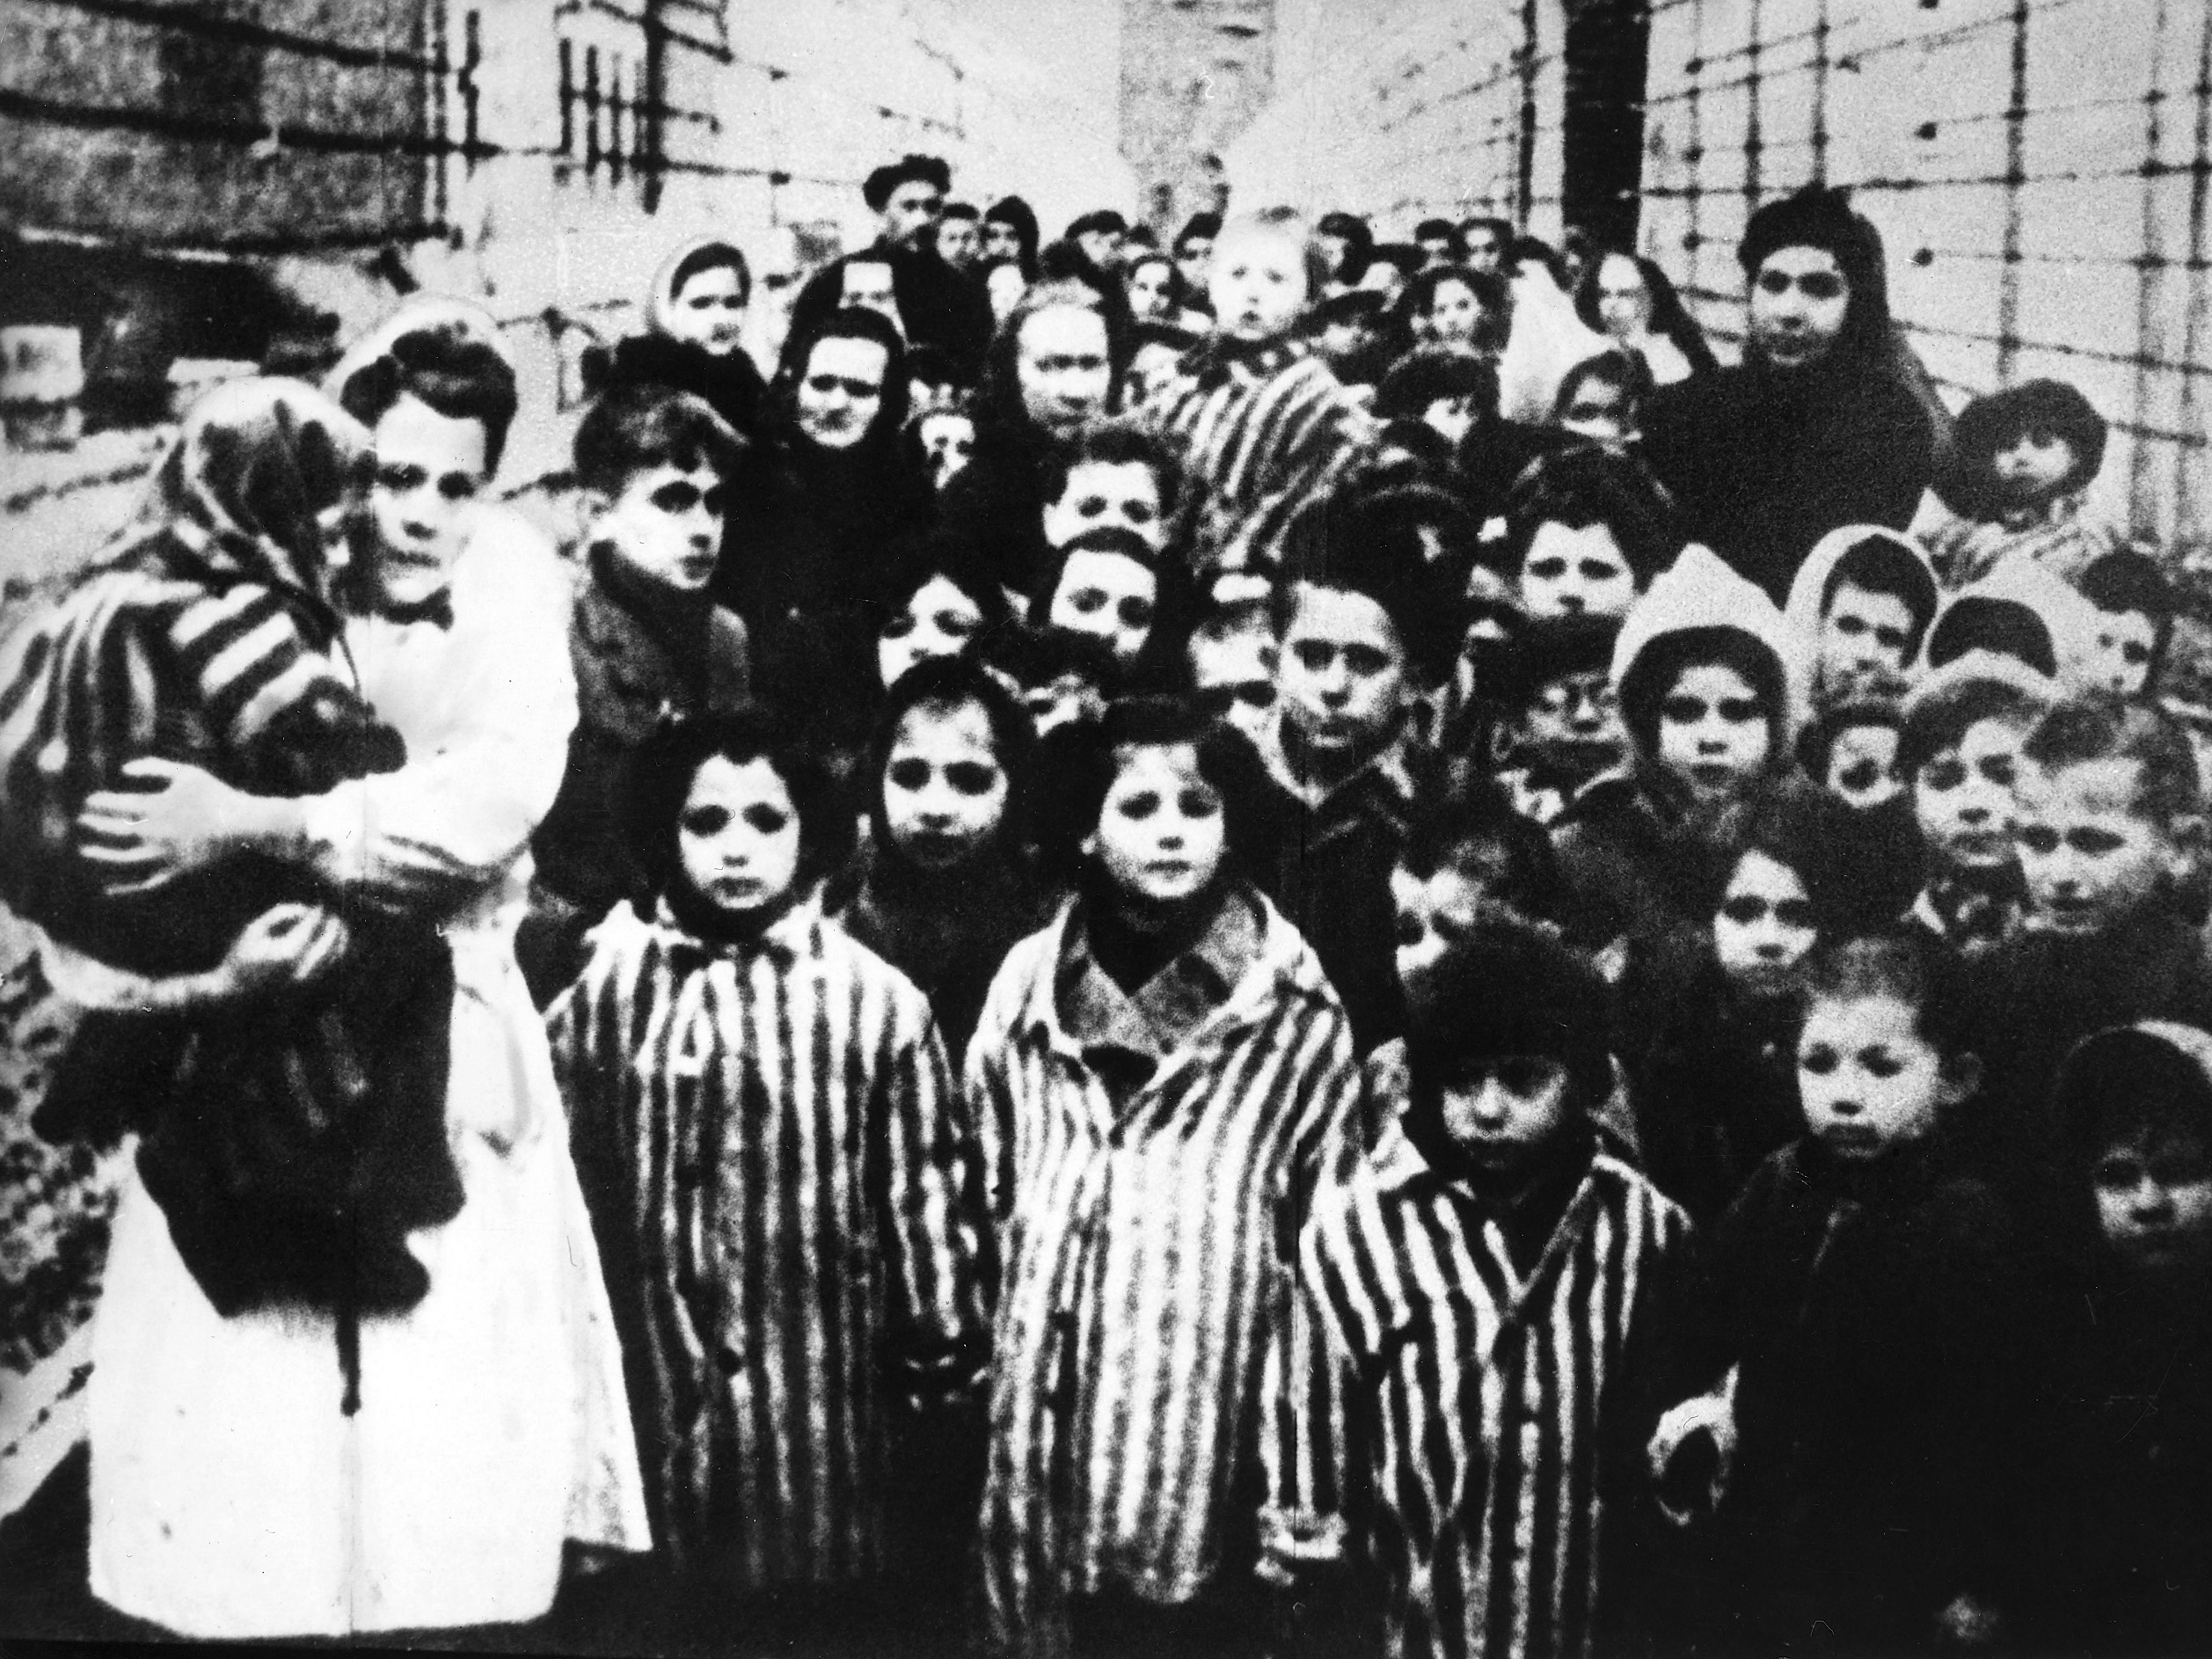 Surviving children of the Auschwitz concentration camp, one of the camps the Nazis had set up to exterminate Jews and kill millions of others. Research into the appropriate way to "re-feed" those who've experienced starvation was prompted by the deaths of camp survivors after liberation.